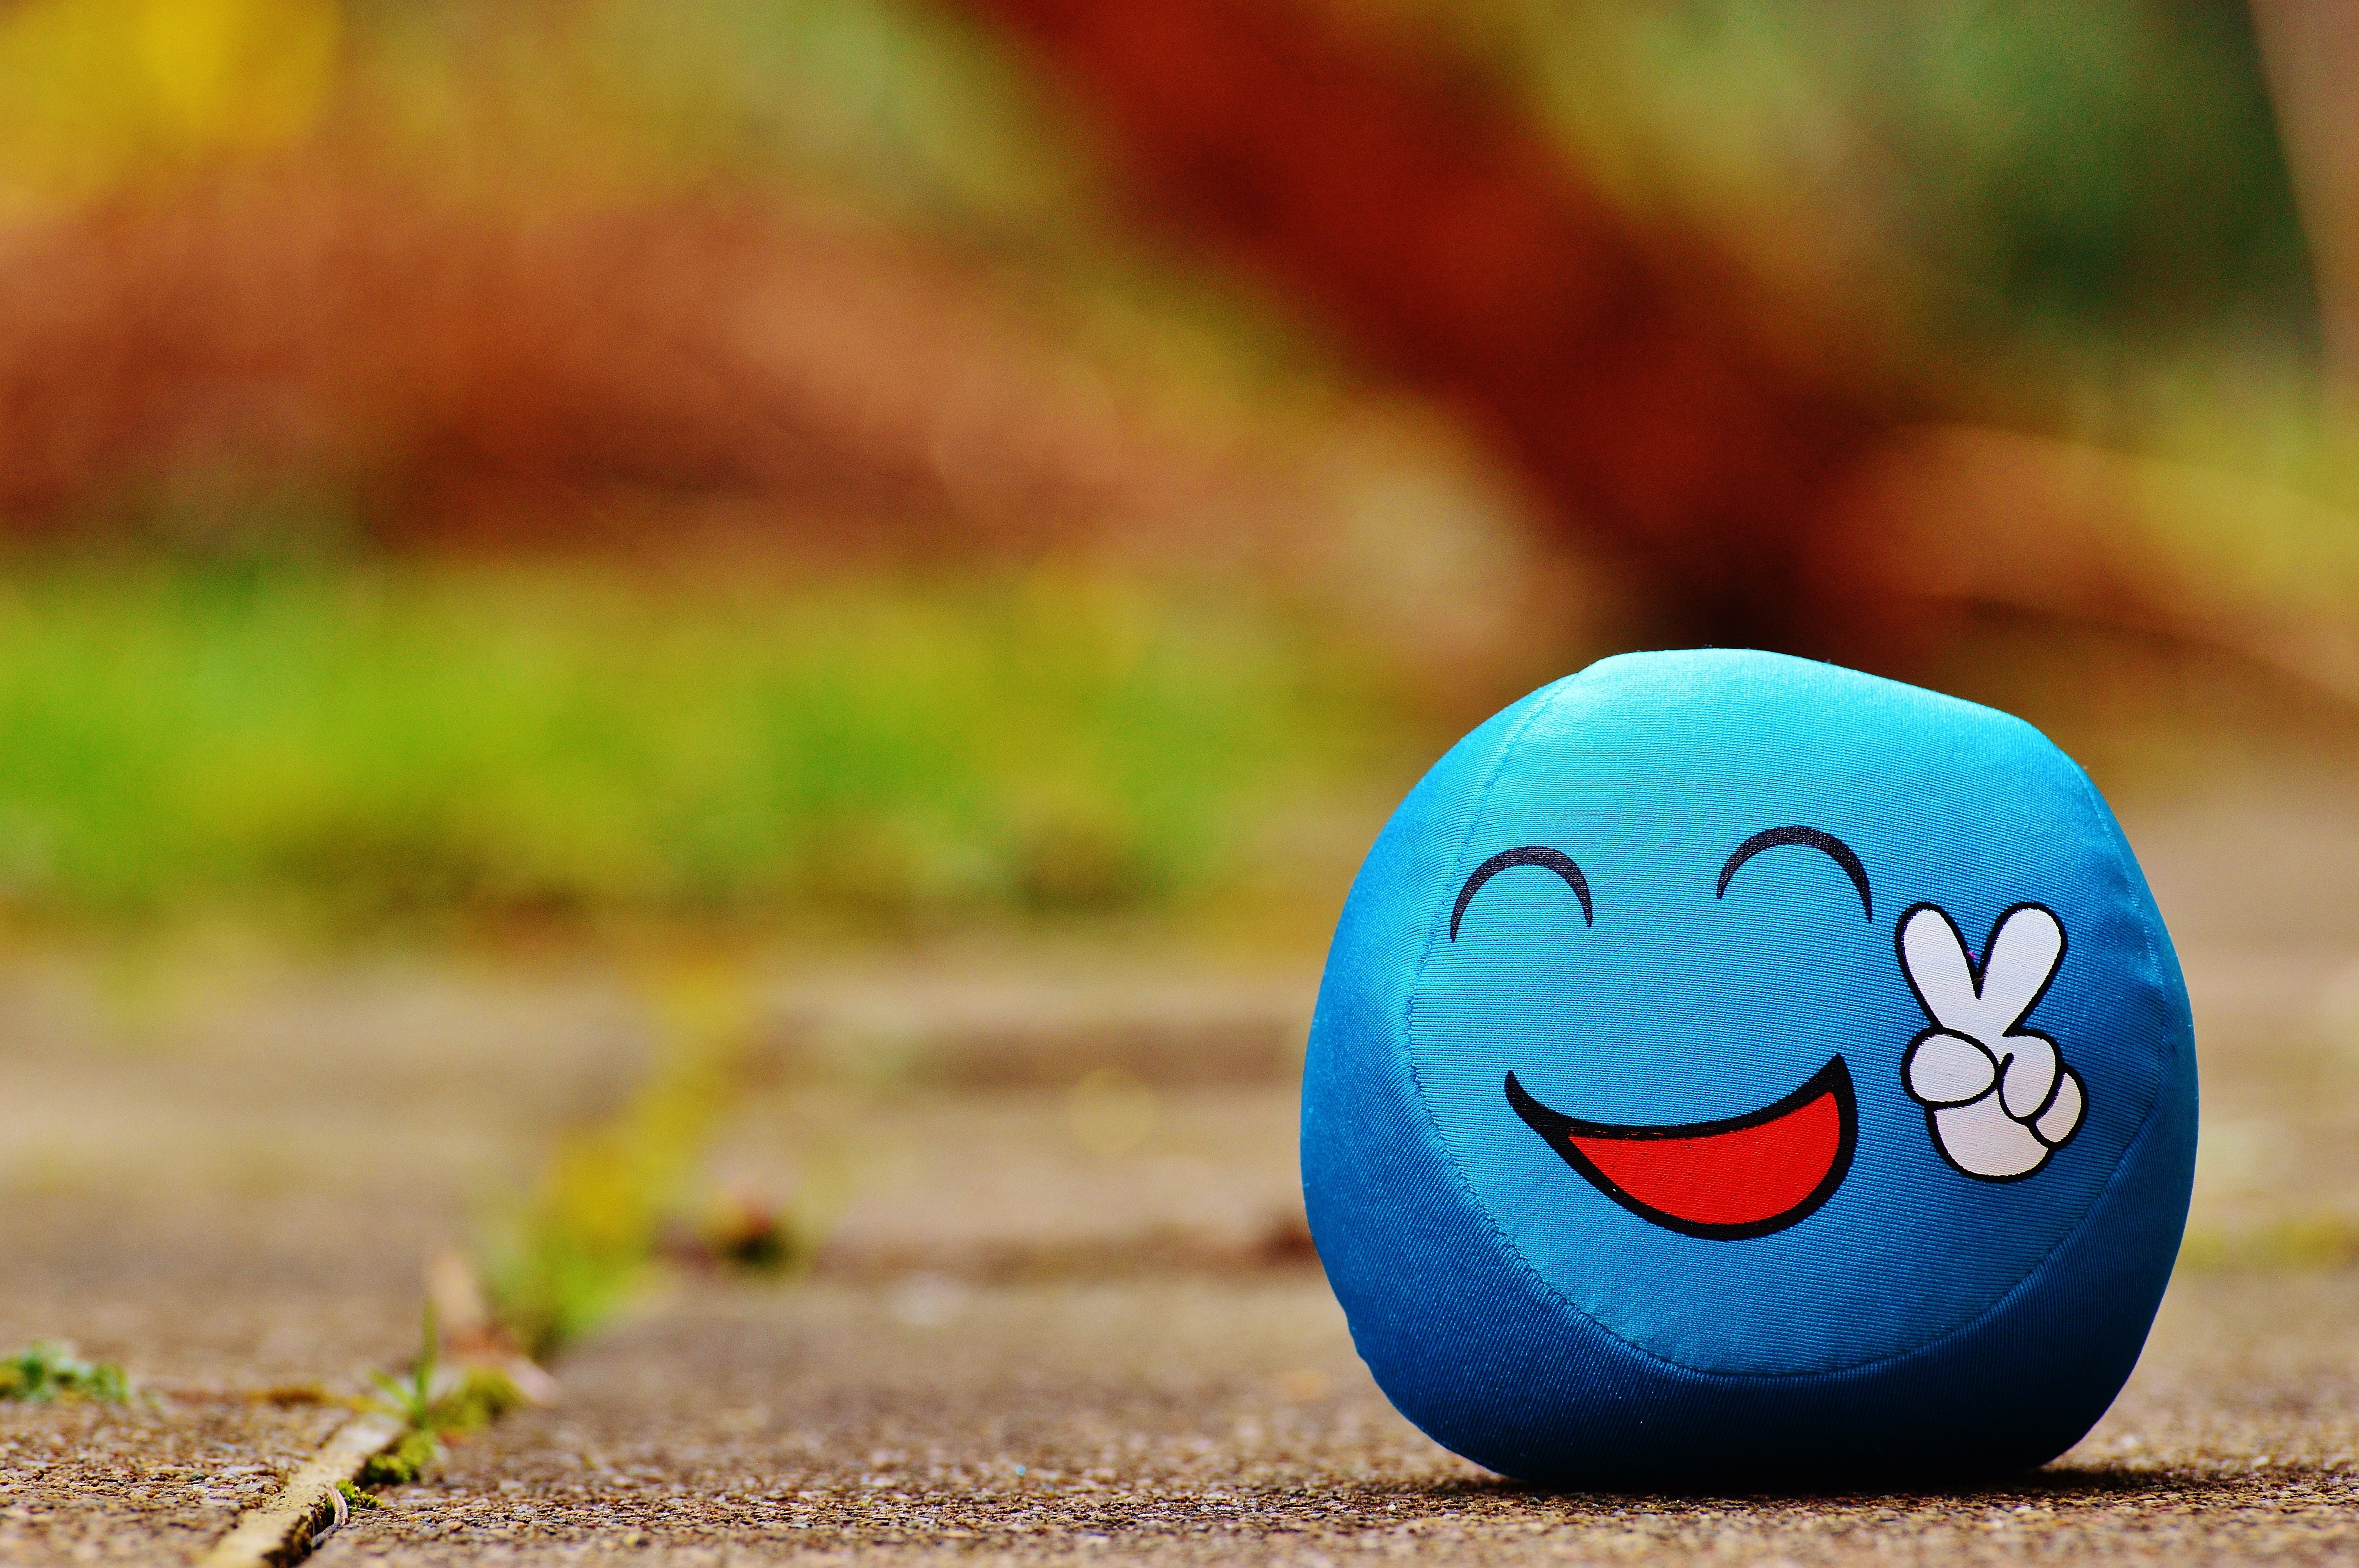 Blue Ball Toy On Ground Image For